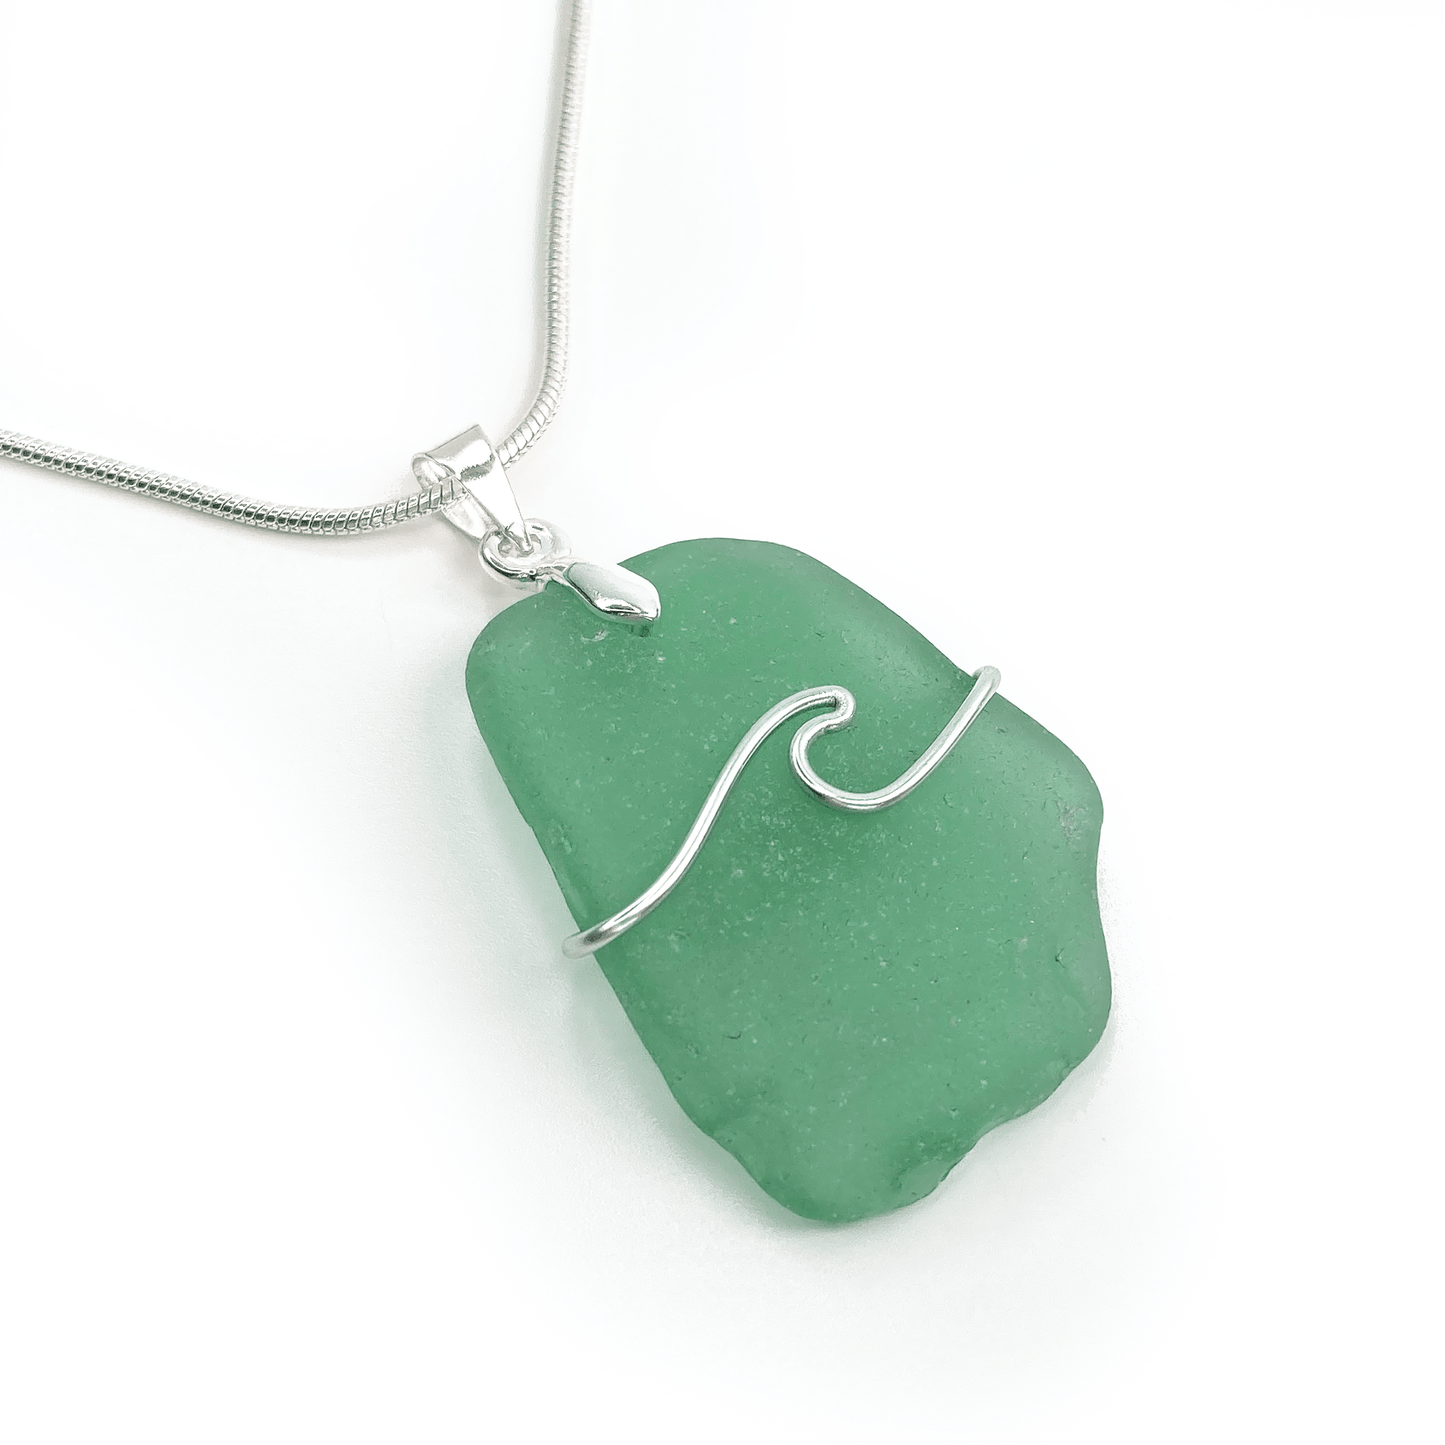 Sea Glass Pendant - Olive Green Wave Wire Wrapped Necklace - Scottish Silver Jewellery - East Neuk Beach Crafts